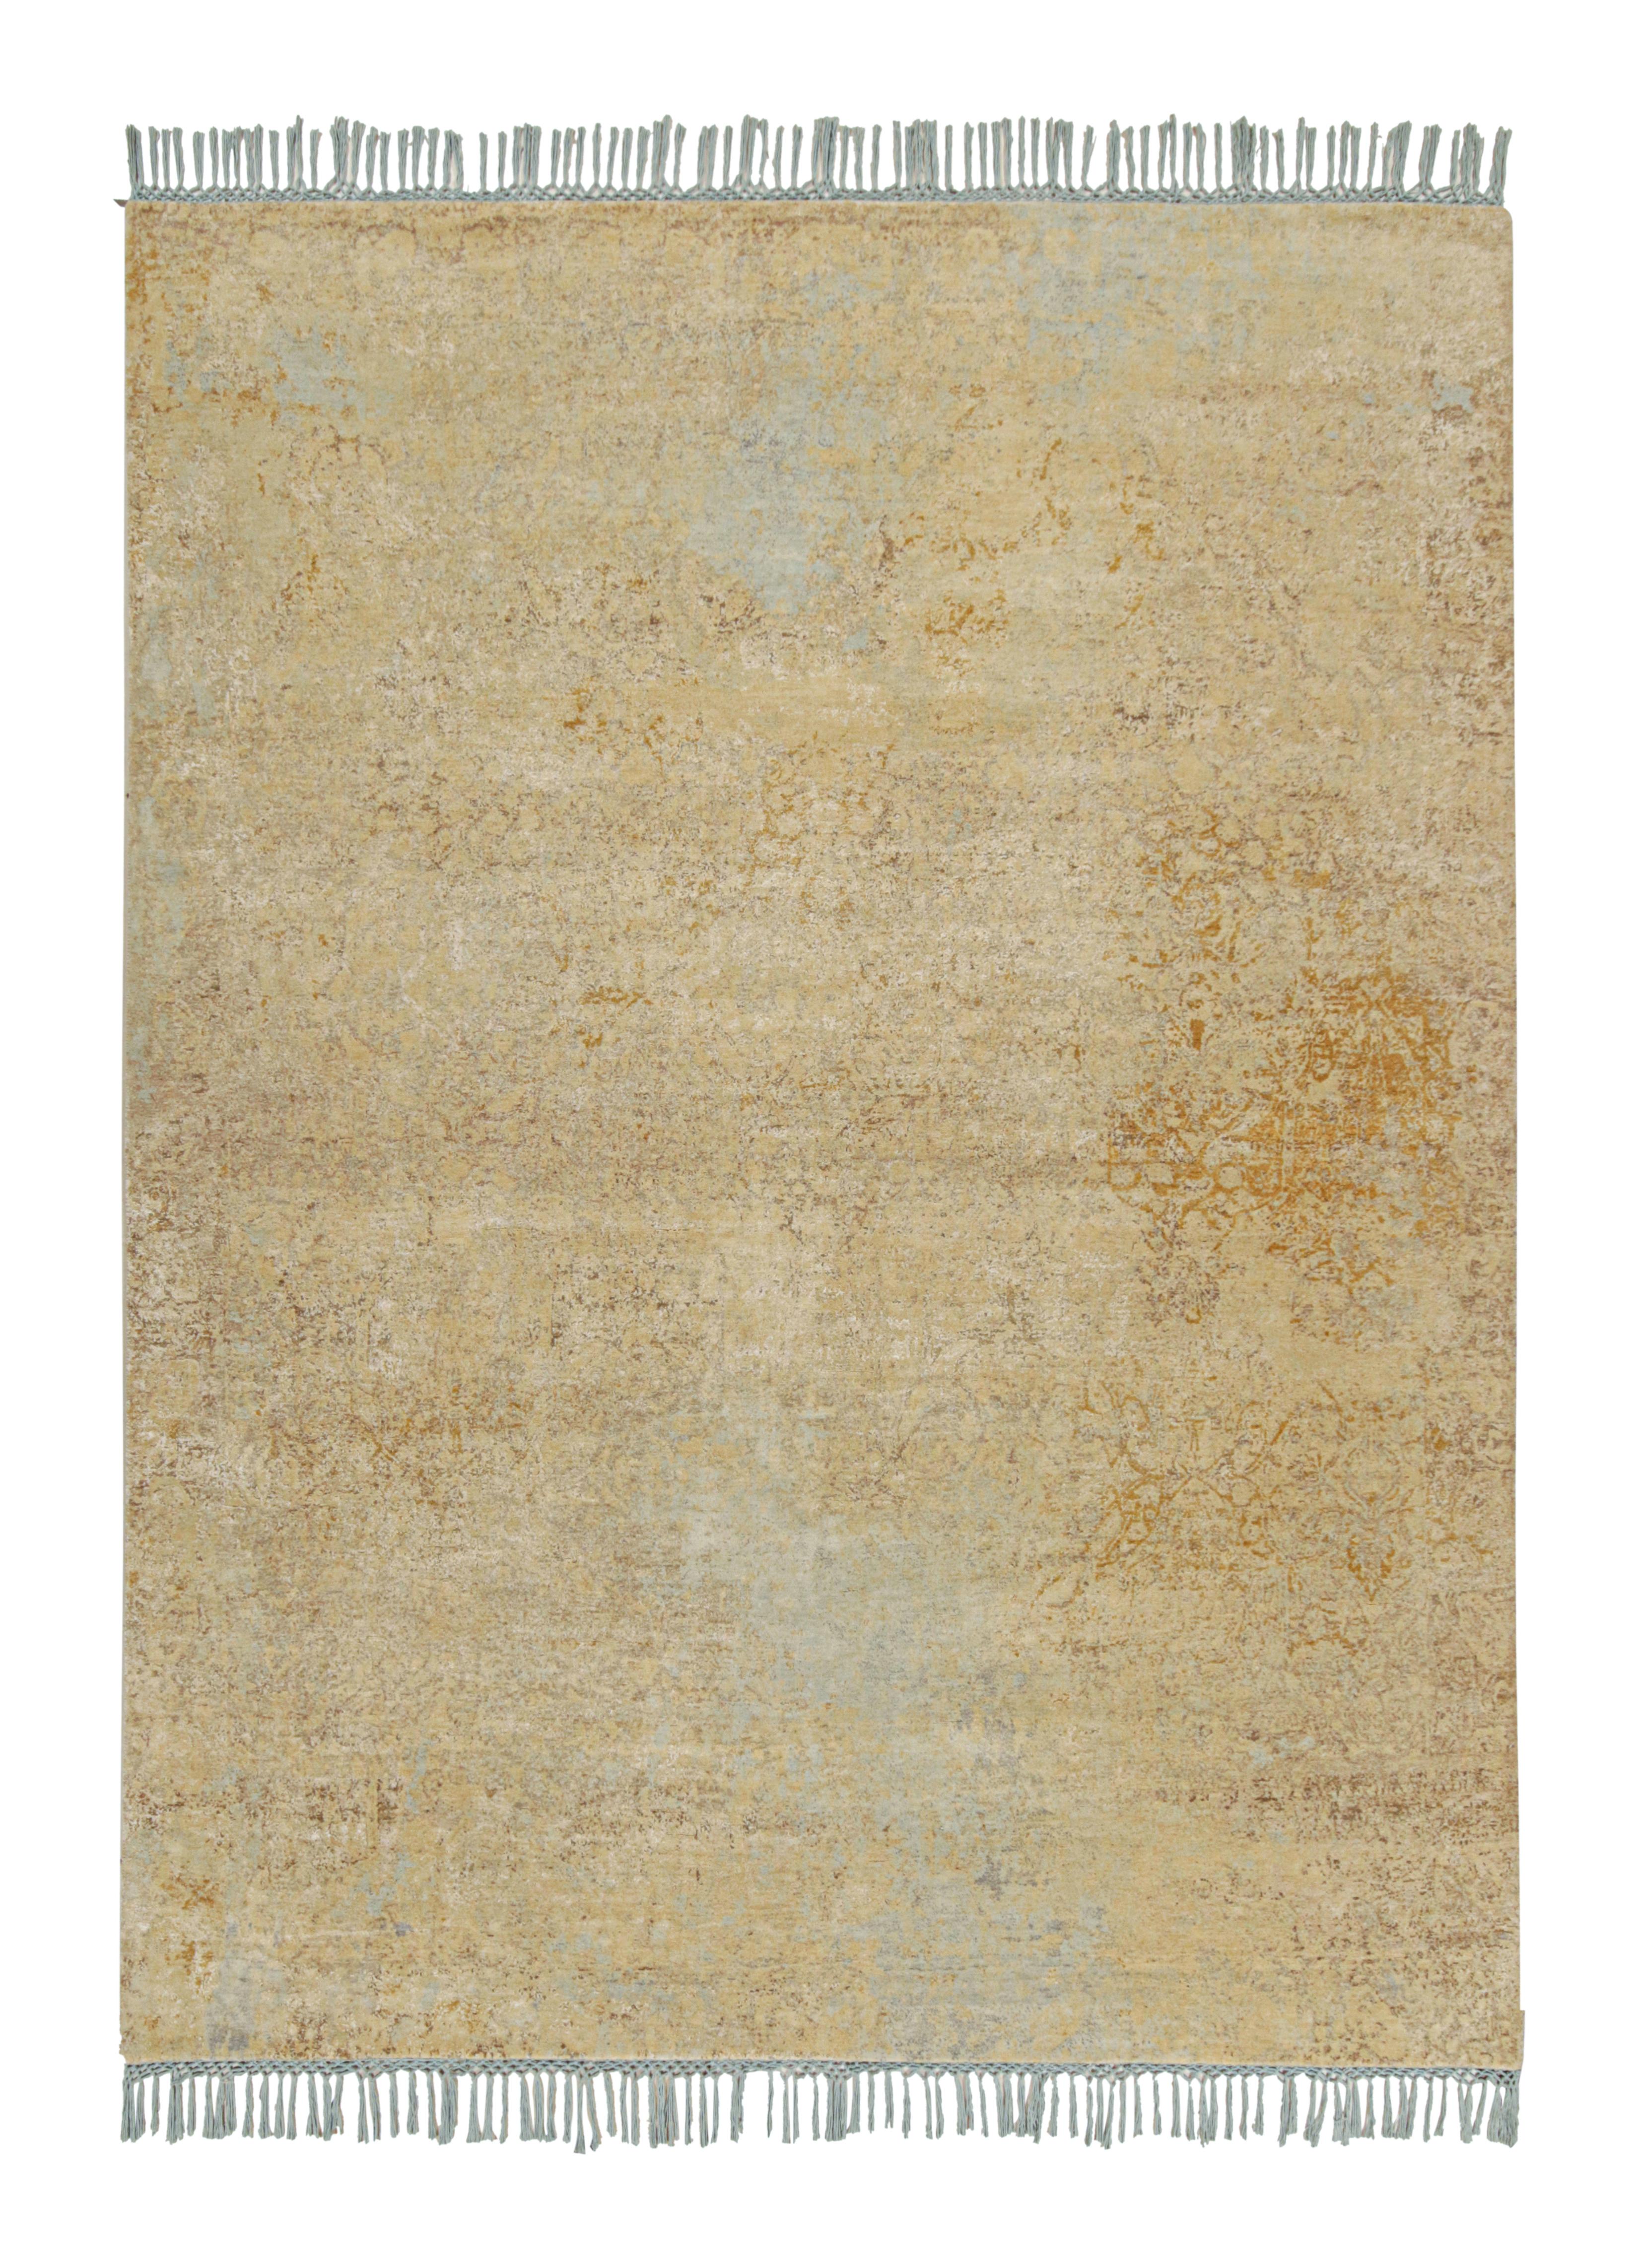 Rug & Kilim’s Farahan style Transitional Rug in Gold and Blue All Over Pattern